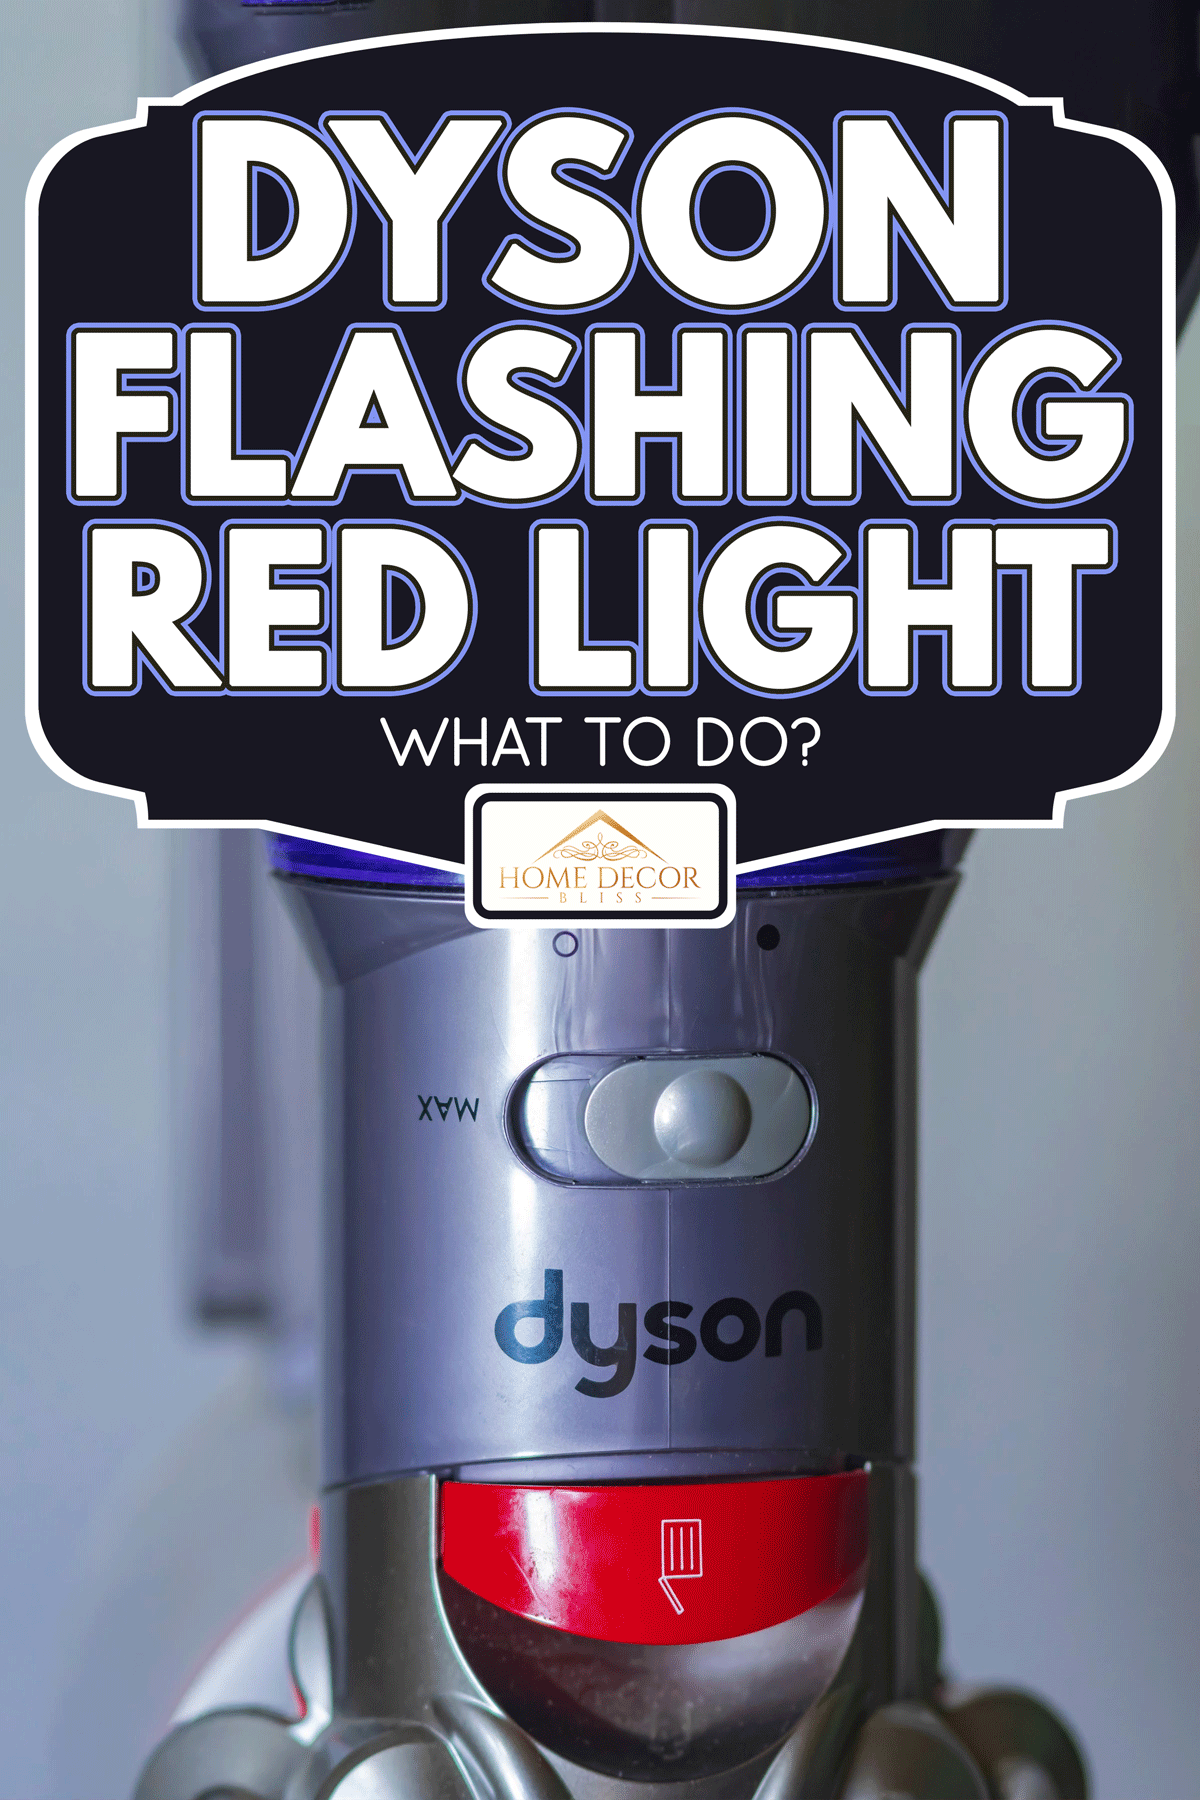 A popular vacuum cleaner from the company Dyson, Dyson Flashing Red Light - What To Do?